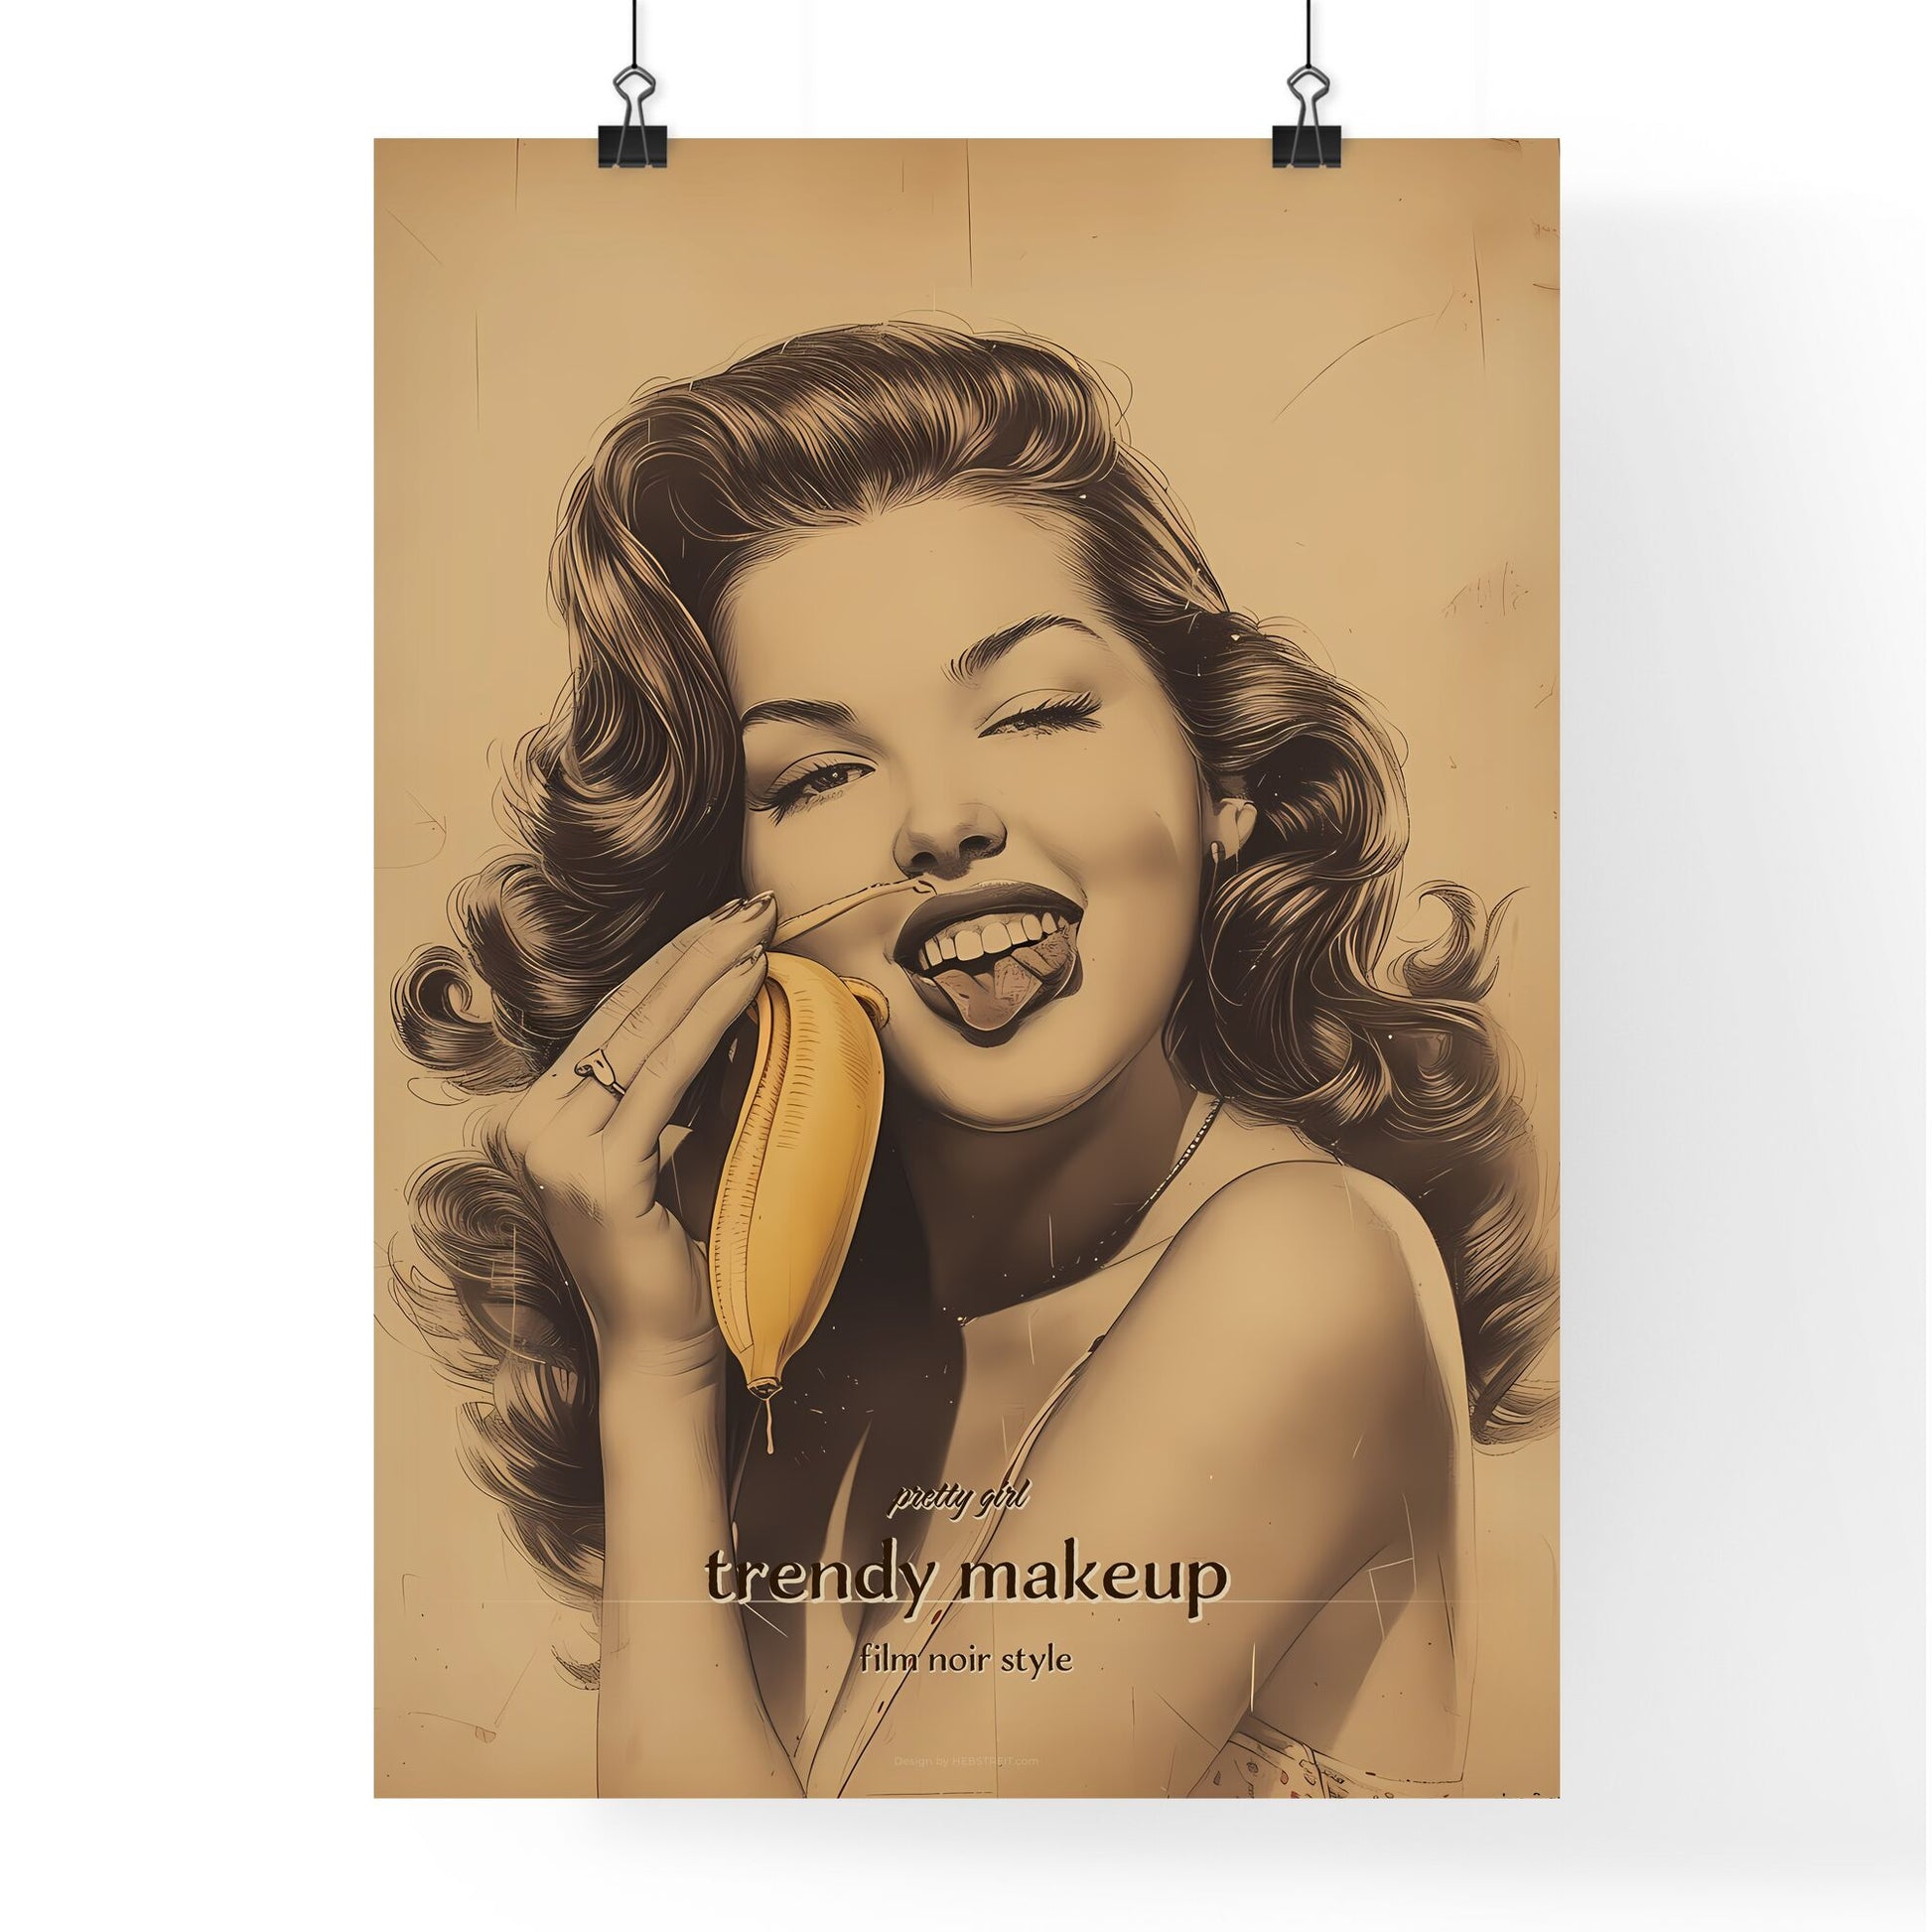 pretty girl, trendy makeup, film noir style, A Poster of a woman holding a banana Default Title